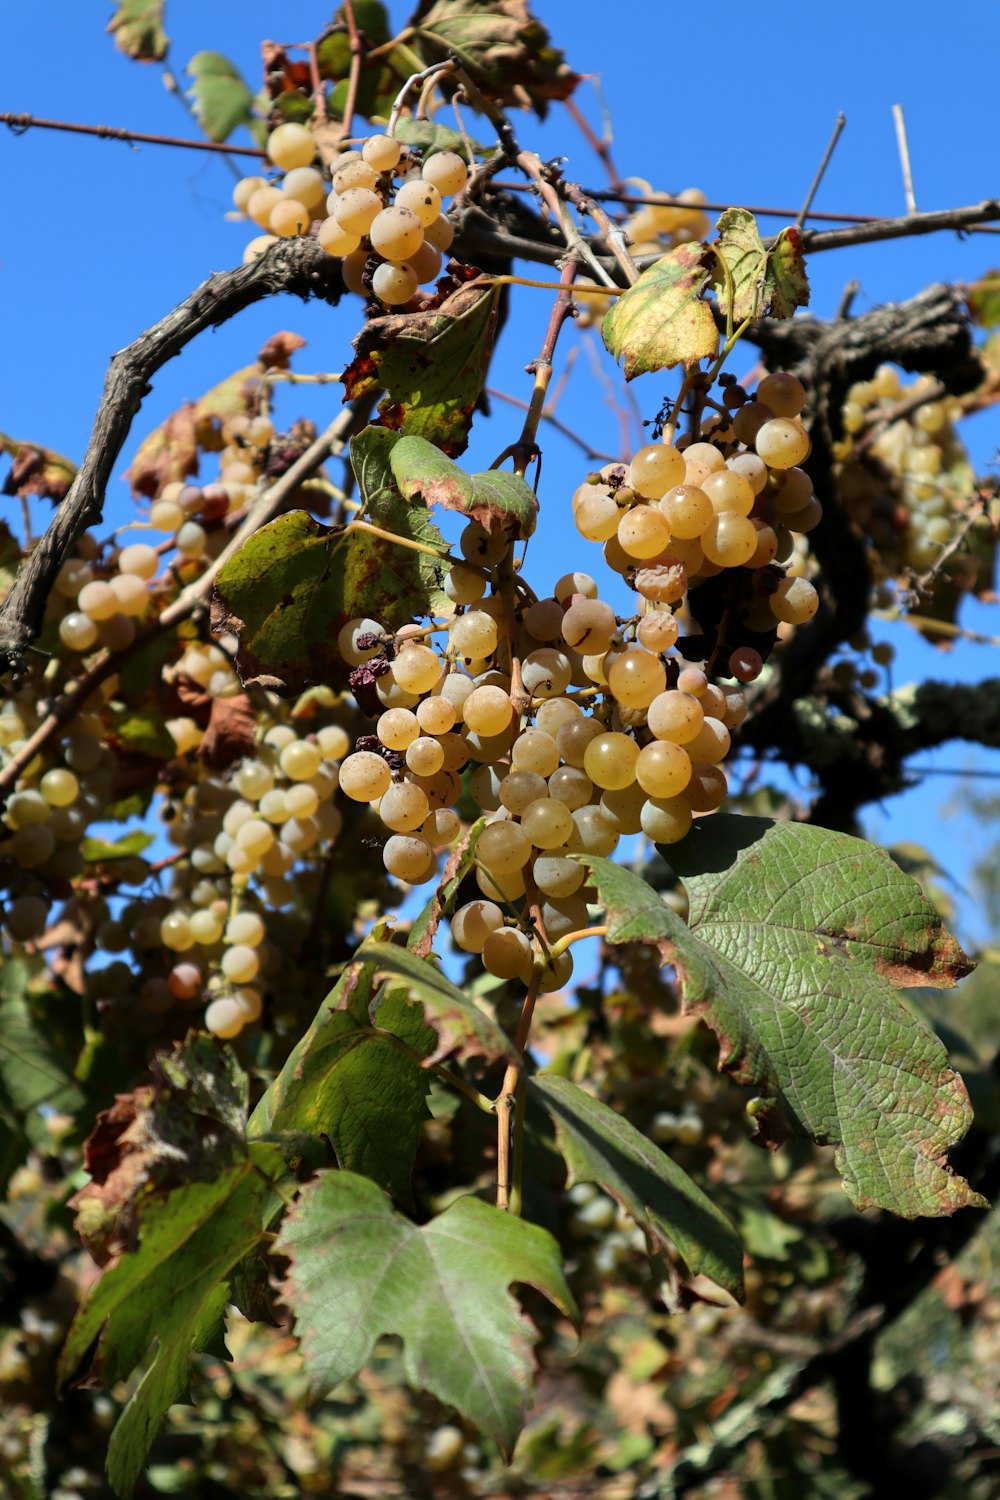 green and brown round fruits